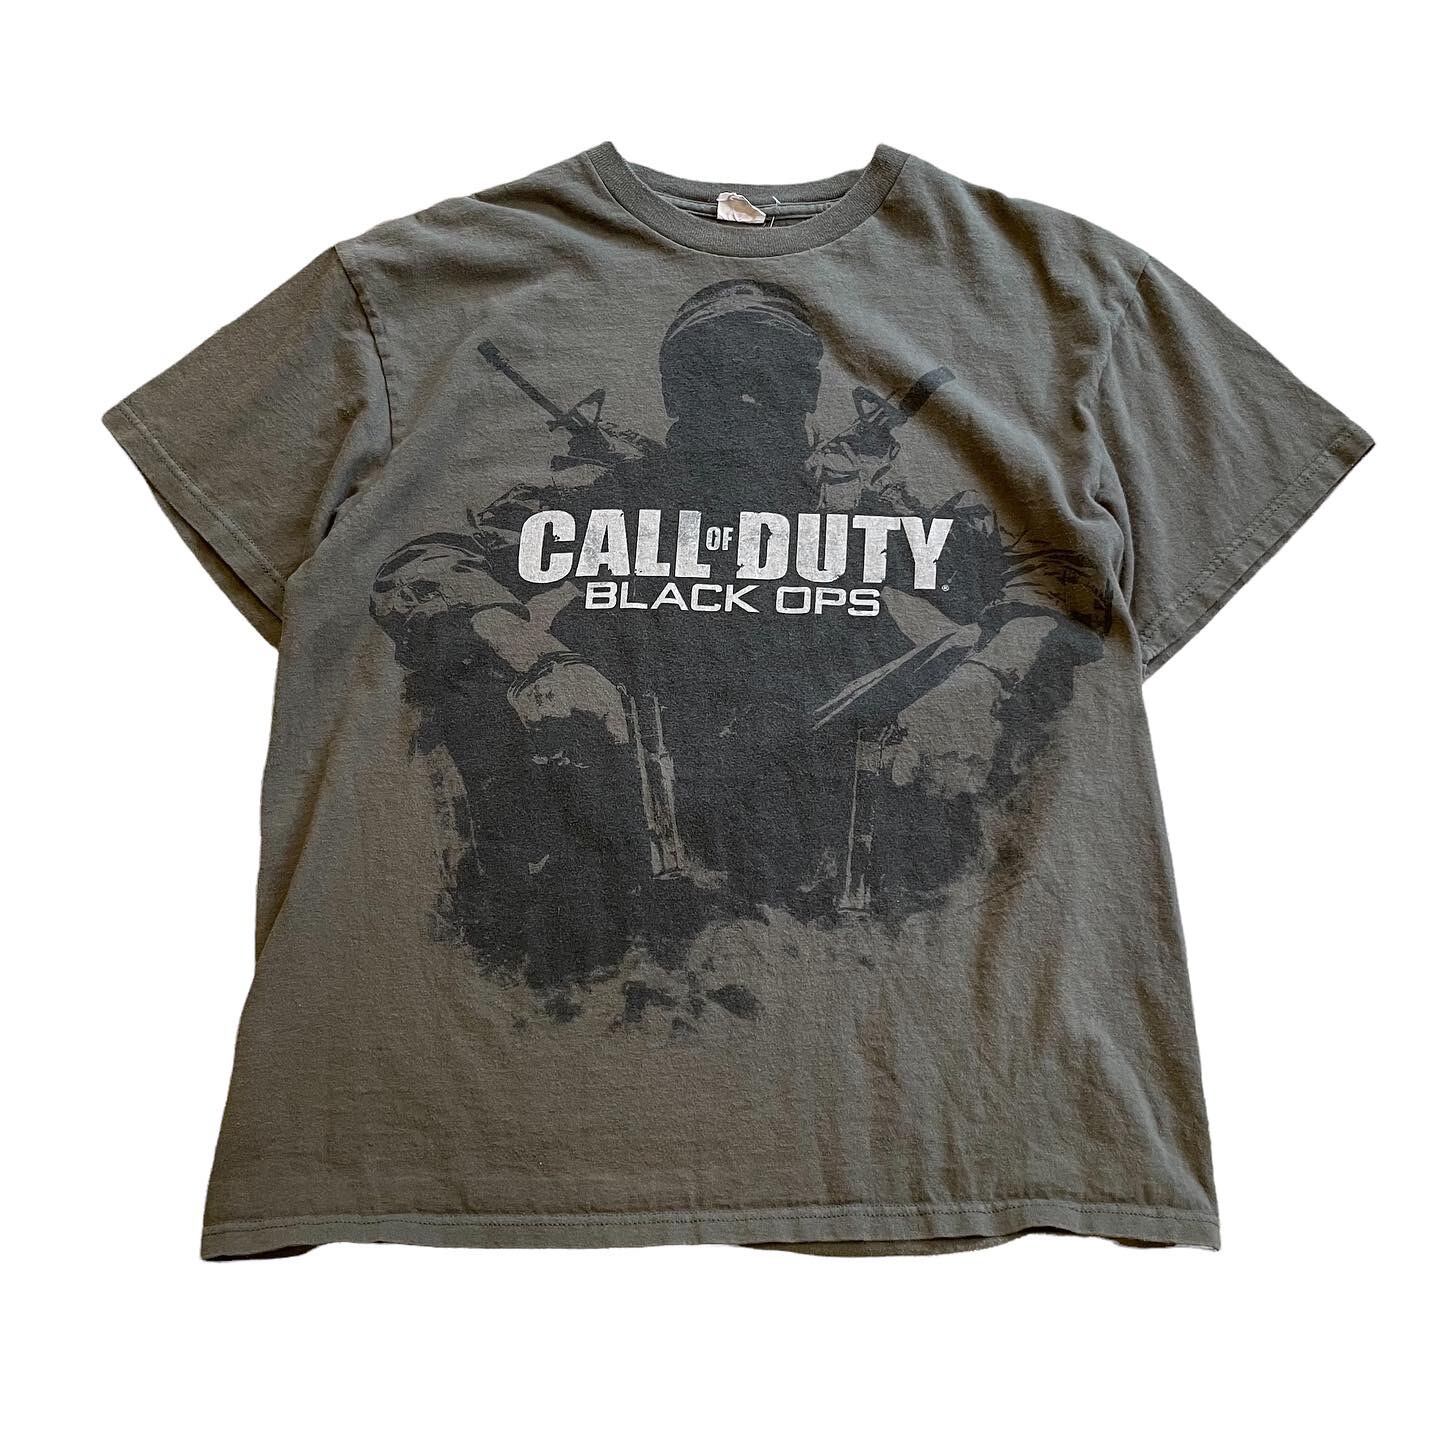 2010s CALL of DUTY "BLACK OPS" T-shirt | What'z up